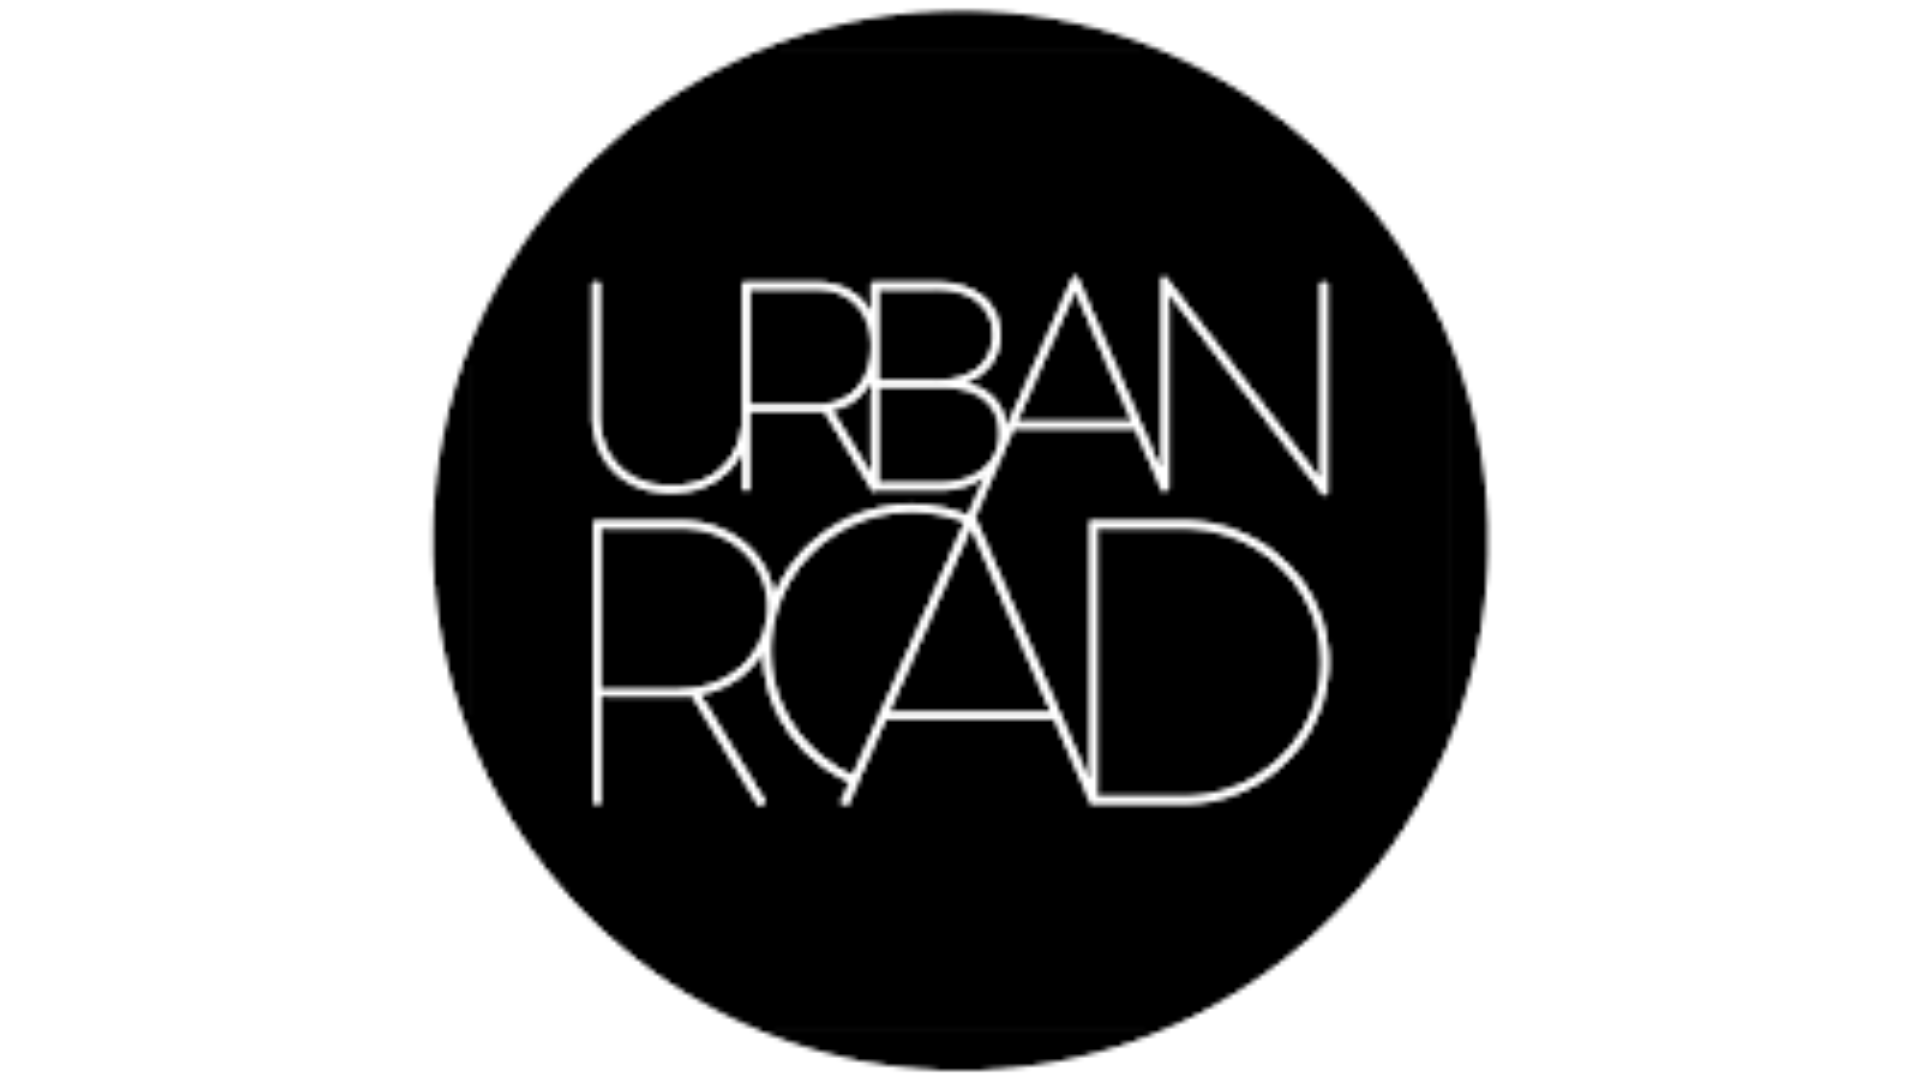 Get the Organic Escape style with Urban Road